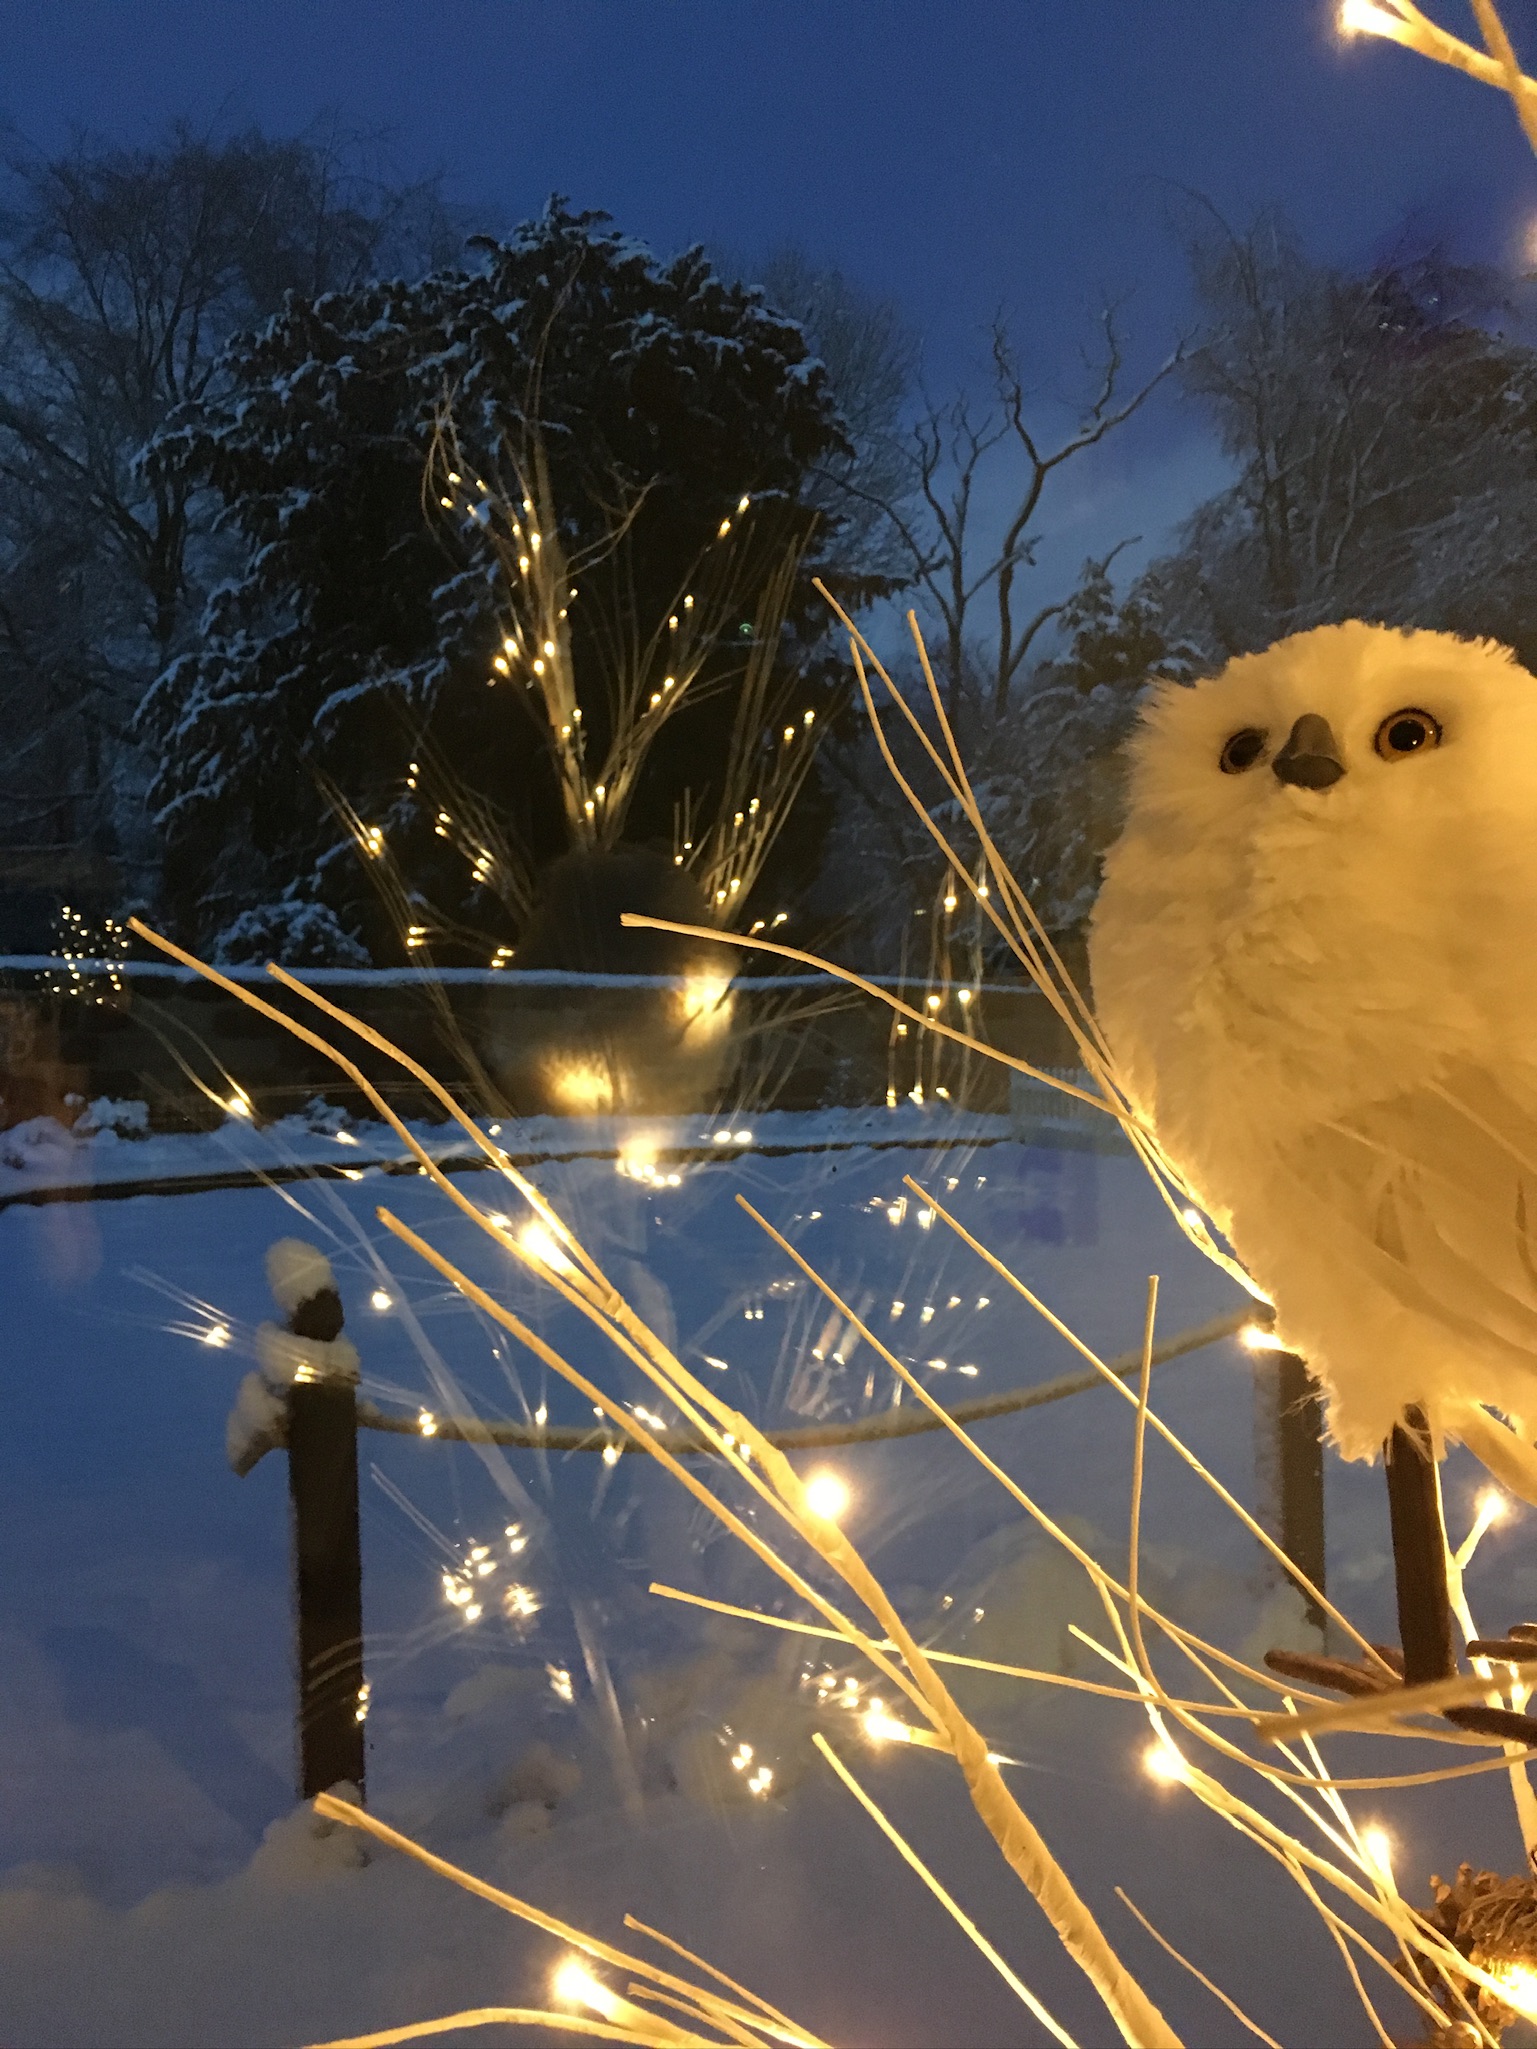 Lights and Owl on a Tree